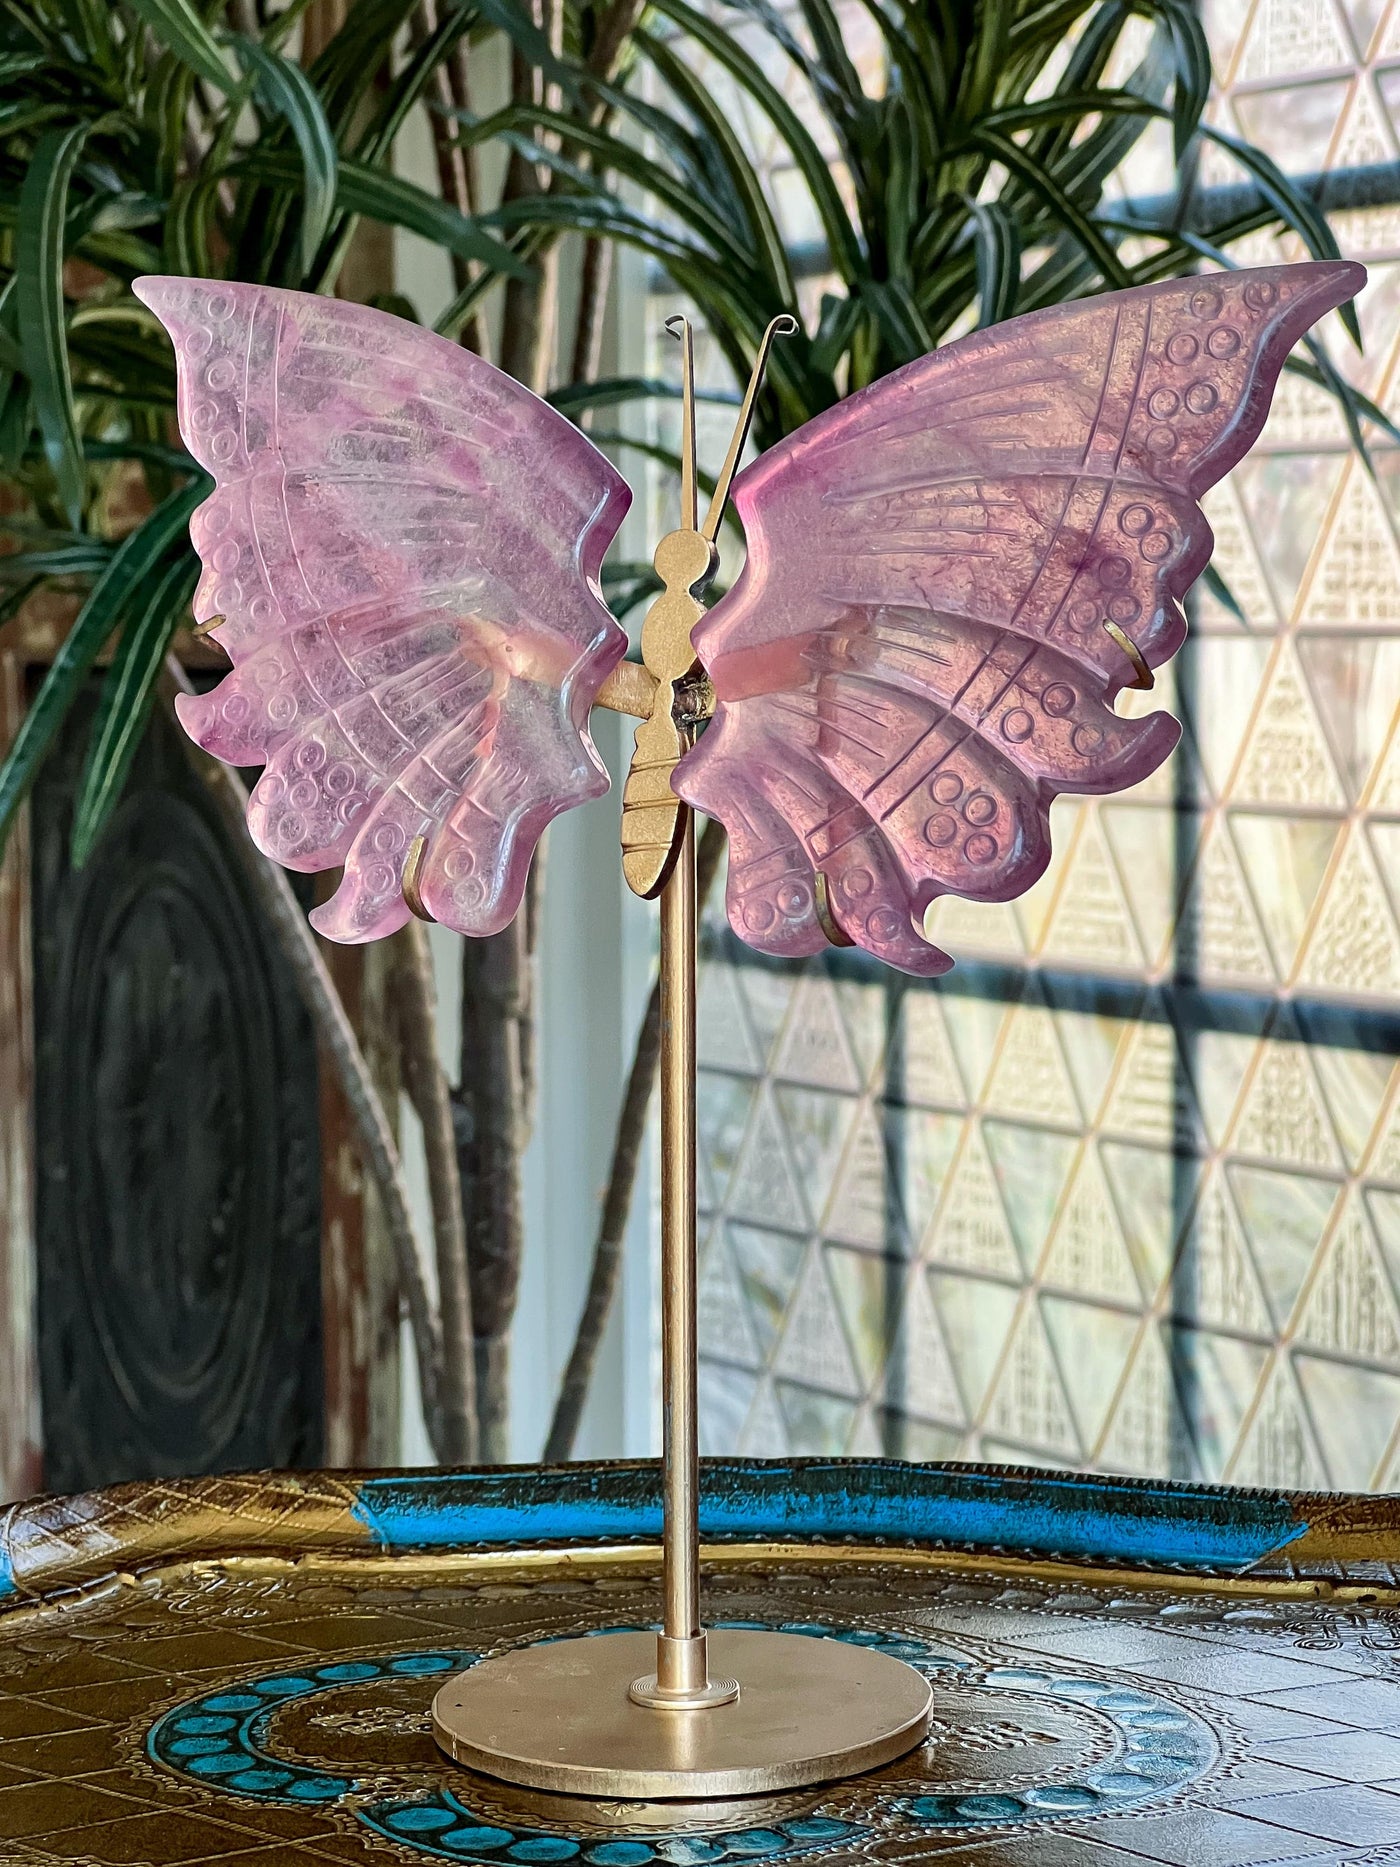 PURPLE FLUORITE BUTTERFLY WINGS ON STAND (MEDIUM) Revive In Style Vintage Furniture Painted Refinished Redesign Beautiful One of a Kind Artistic Antique Unique Home Decor Interior Design French Country Shabby Chic Cottage Farmhouse Grandmillenial Coastal Chalk Paint Metallic Glam Eclectic Quality Dovetailed Rustic Furniture Painter Pinterest Bedroom Living Room Entryway Kitchen Home Trends House Styles Decorating ideas